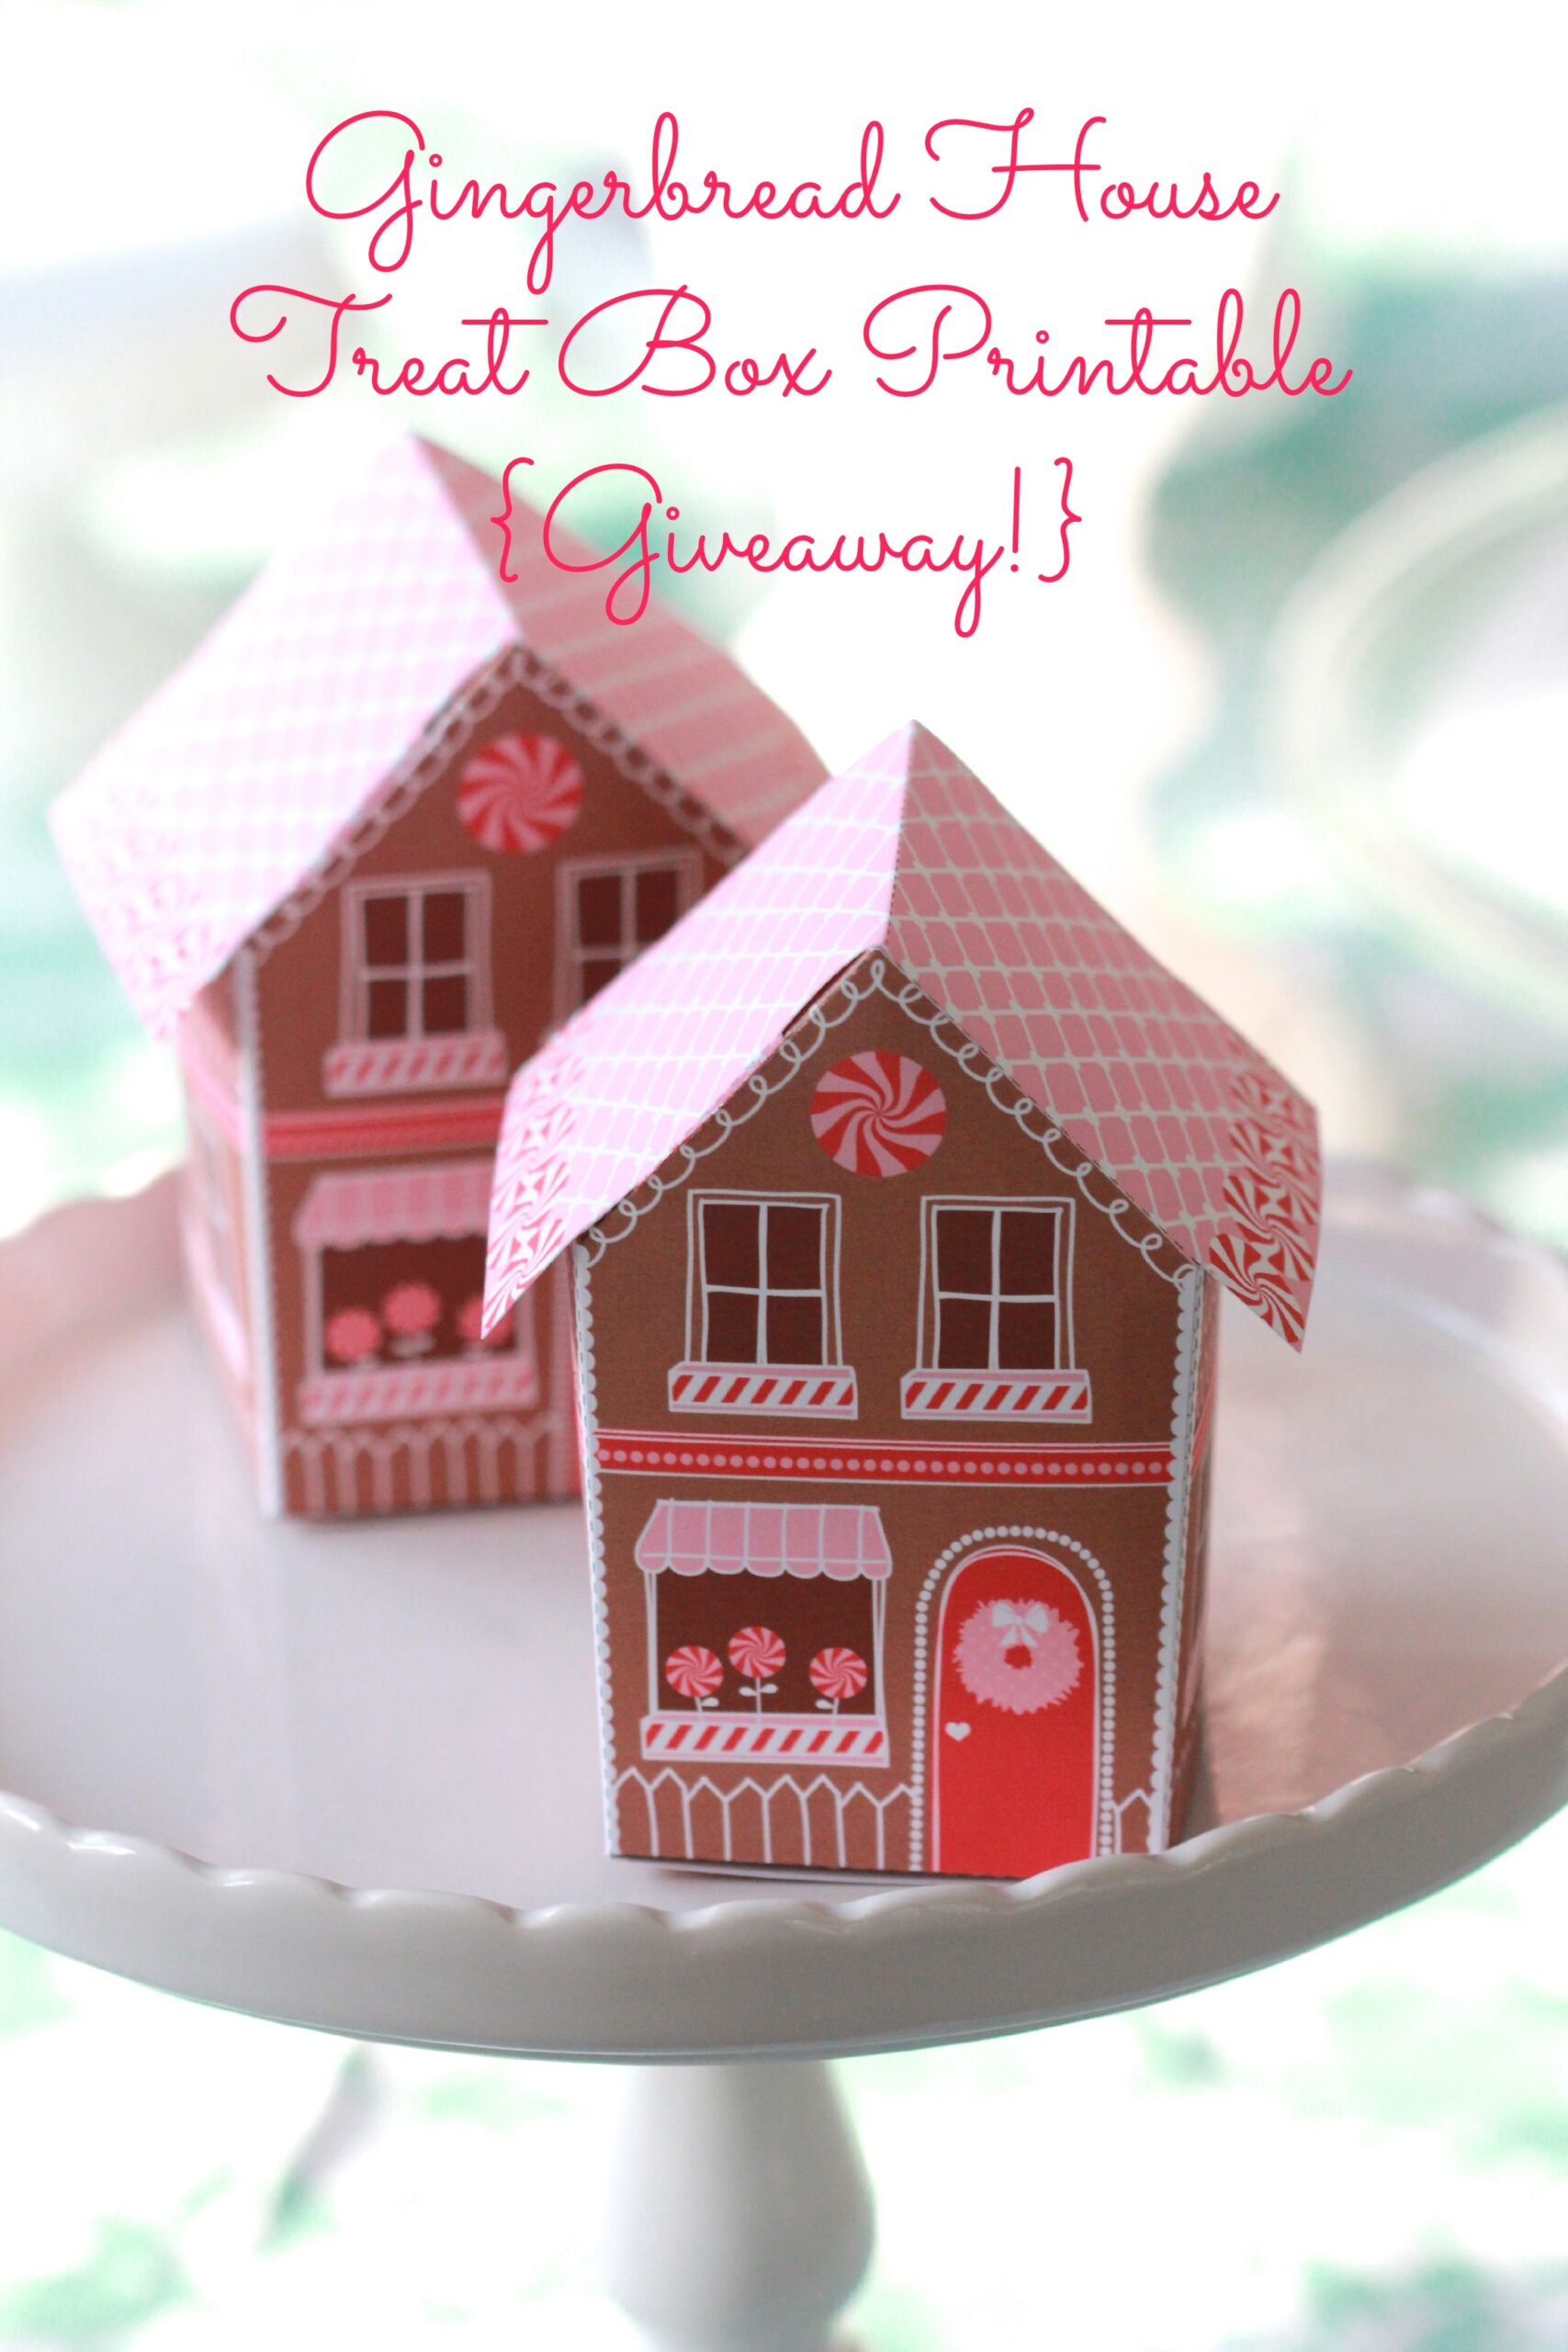 gingerbread-house-treat-box-printable-giveaway-sweetopia